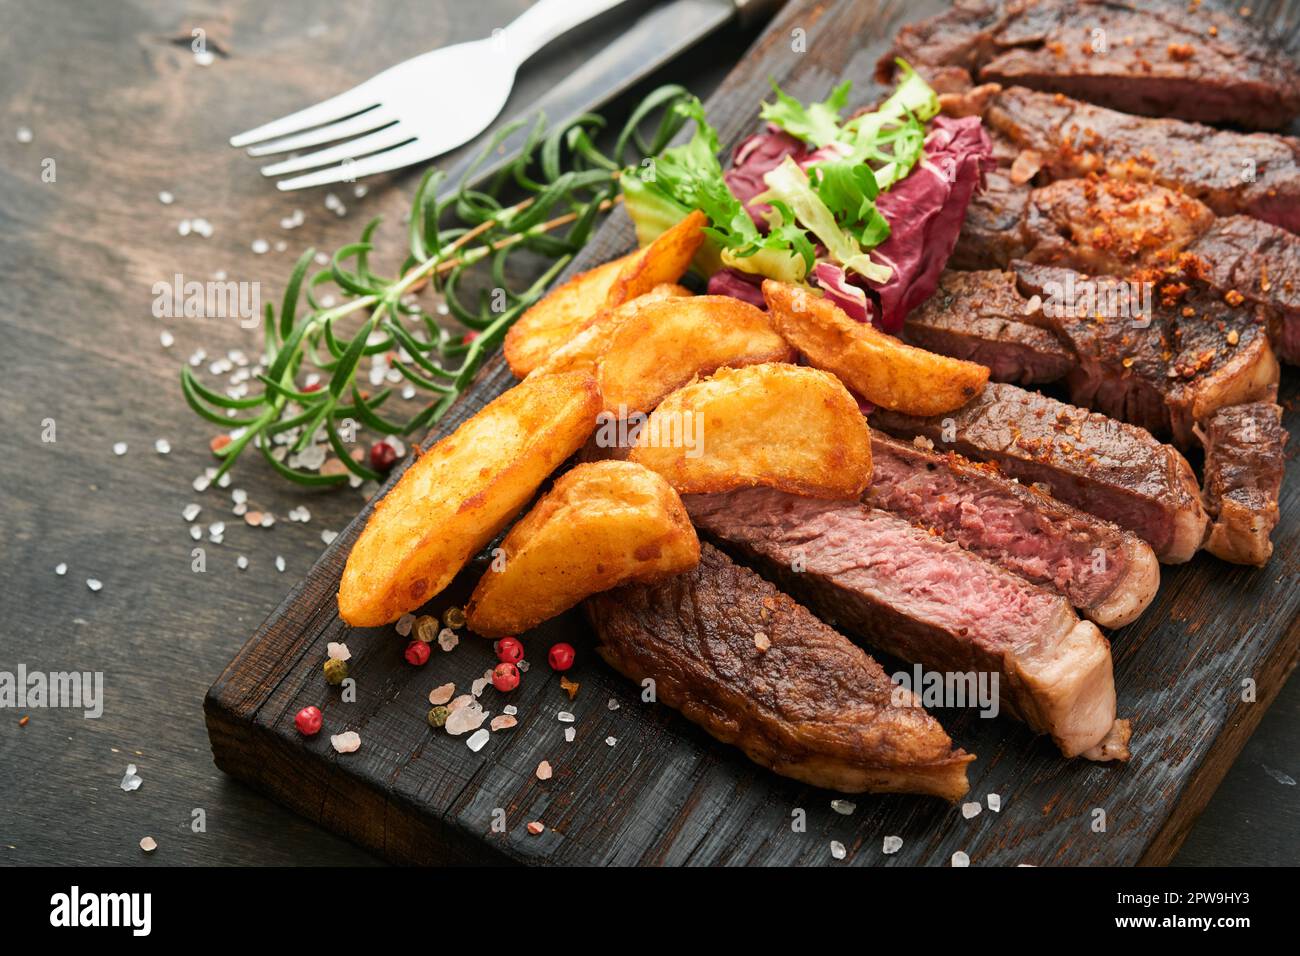 Steaks. Sliced grilled meat steak New York, Ribeye or Chuck roll with with garnished with salad and french fries on black marble board on old wooden b Stock Photo